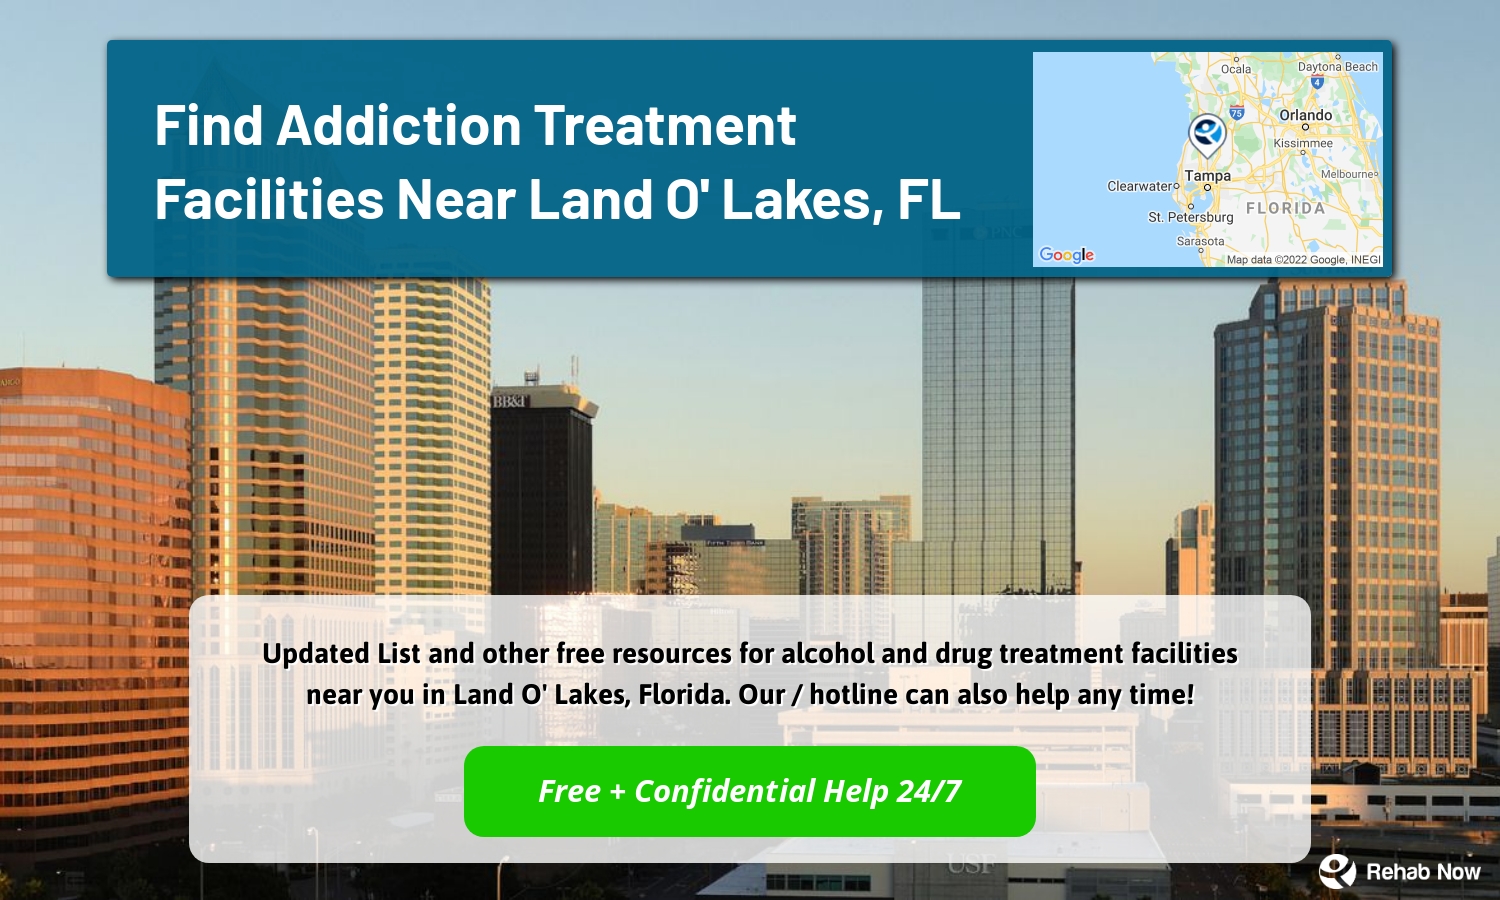  Updated List and other free resources for alcohol and drug treatment facilities near you in Land O' Lakes, Florida. Our / hotline can also help any time!